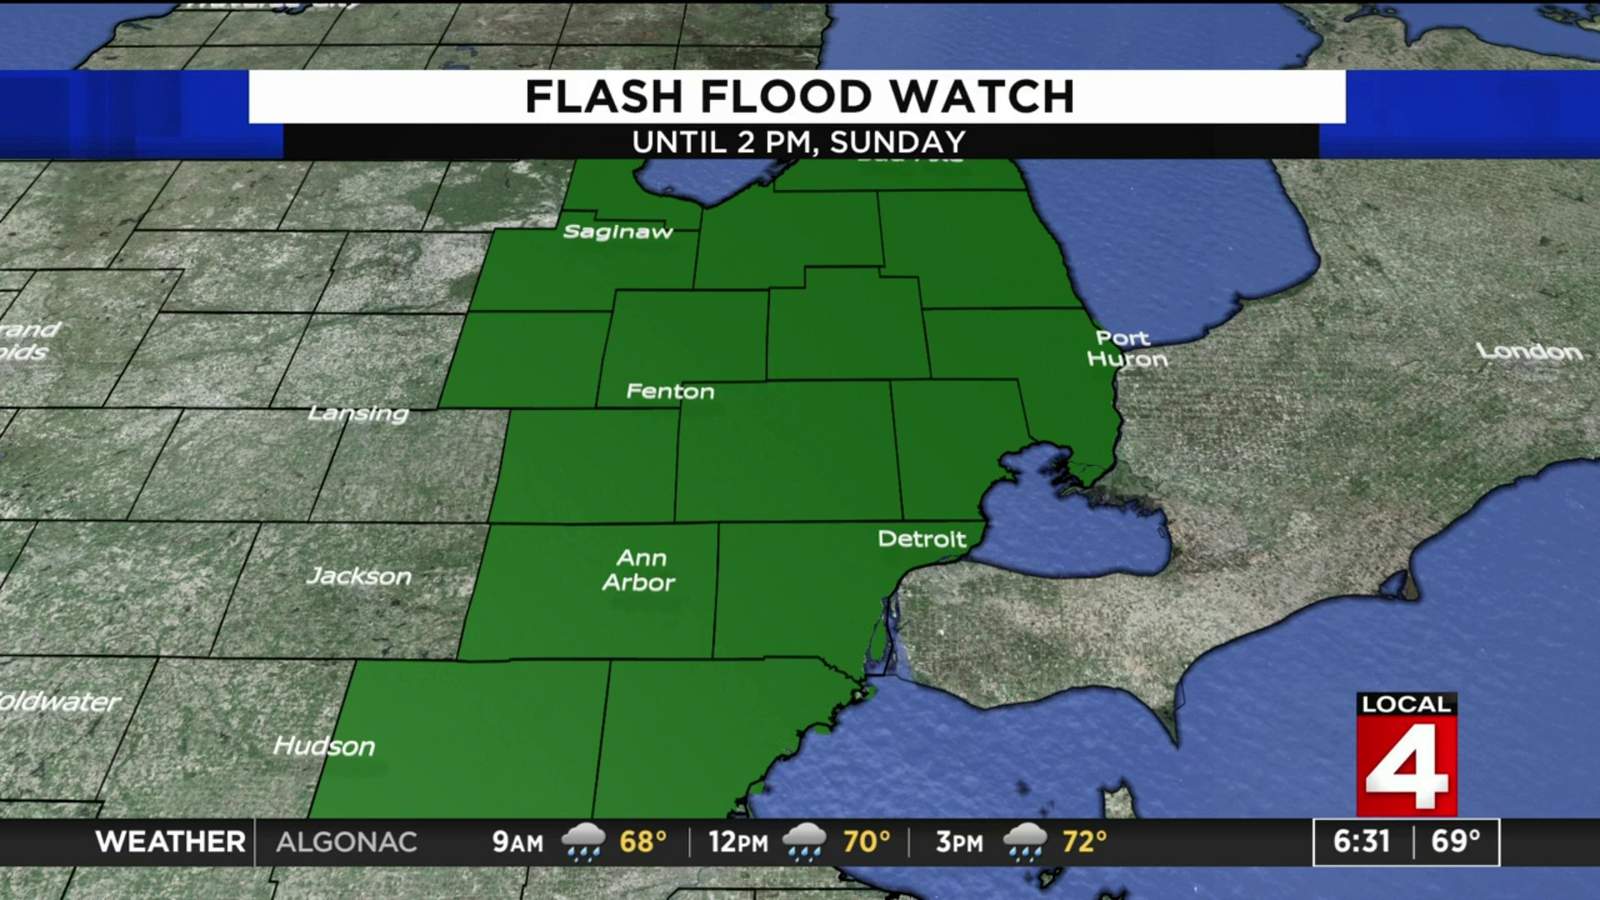 Flash Flood Watch in effect for some Michigan counties until Sunday afternoon